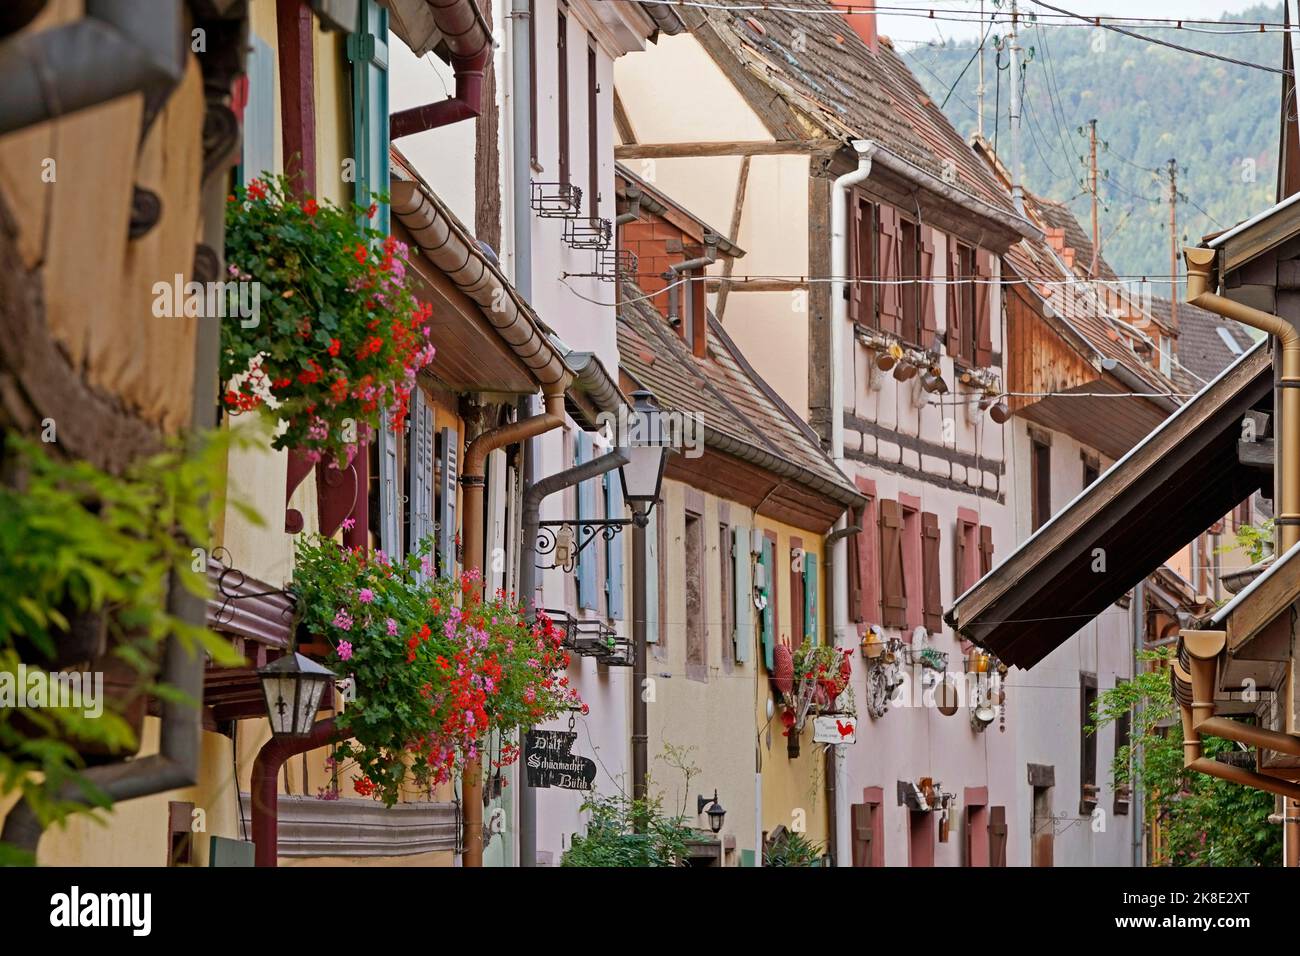 Colourful half-timbered houses in the historic old town of Eguisheim, Alsace, France Stock Photo